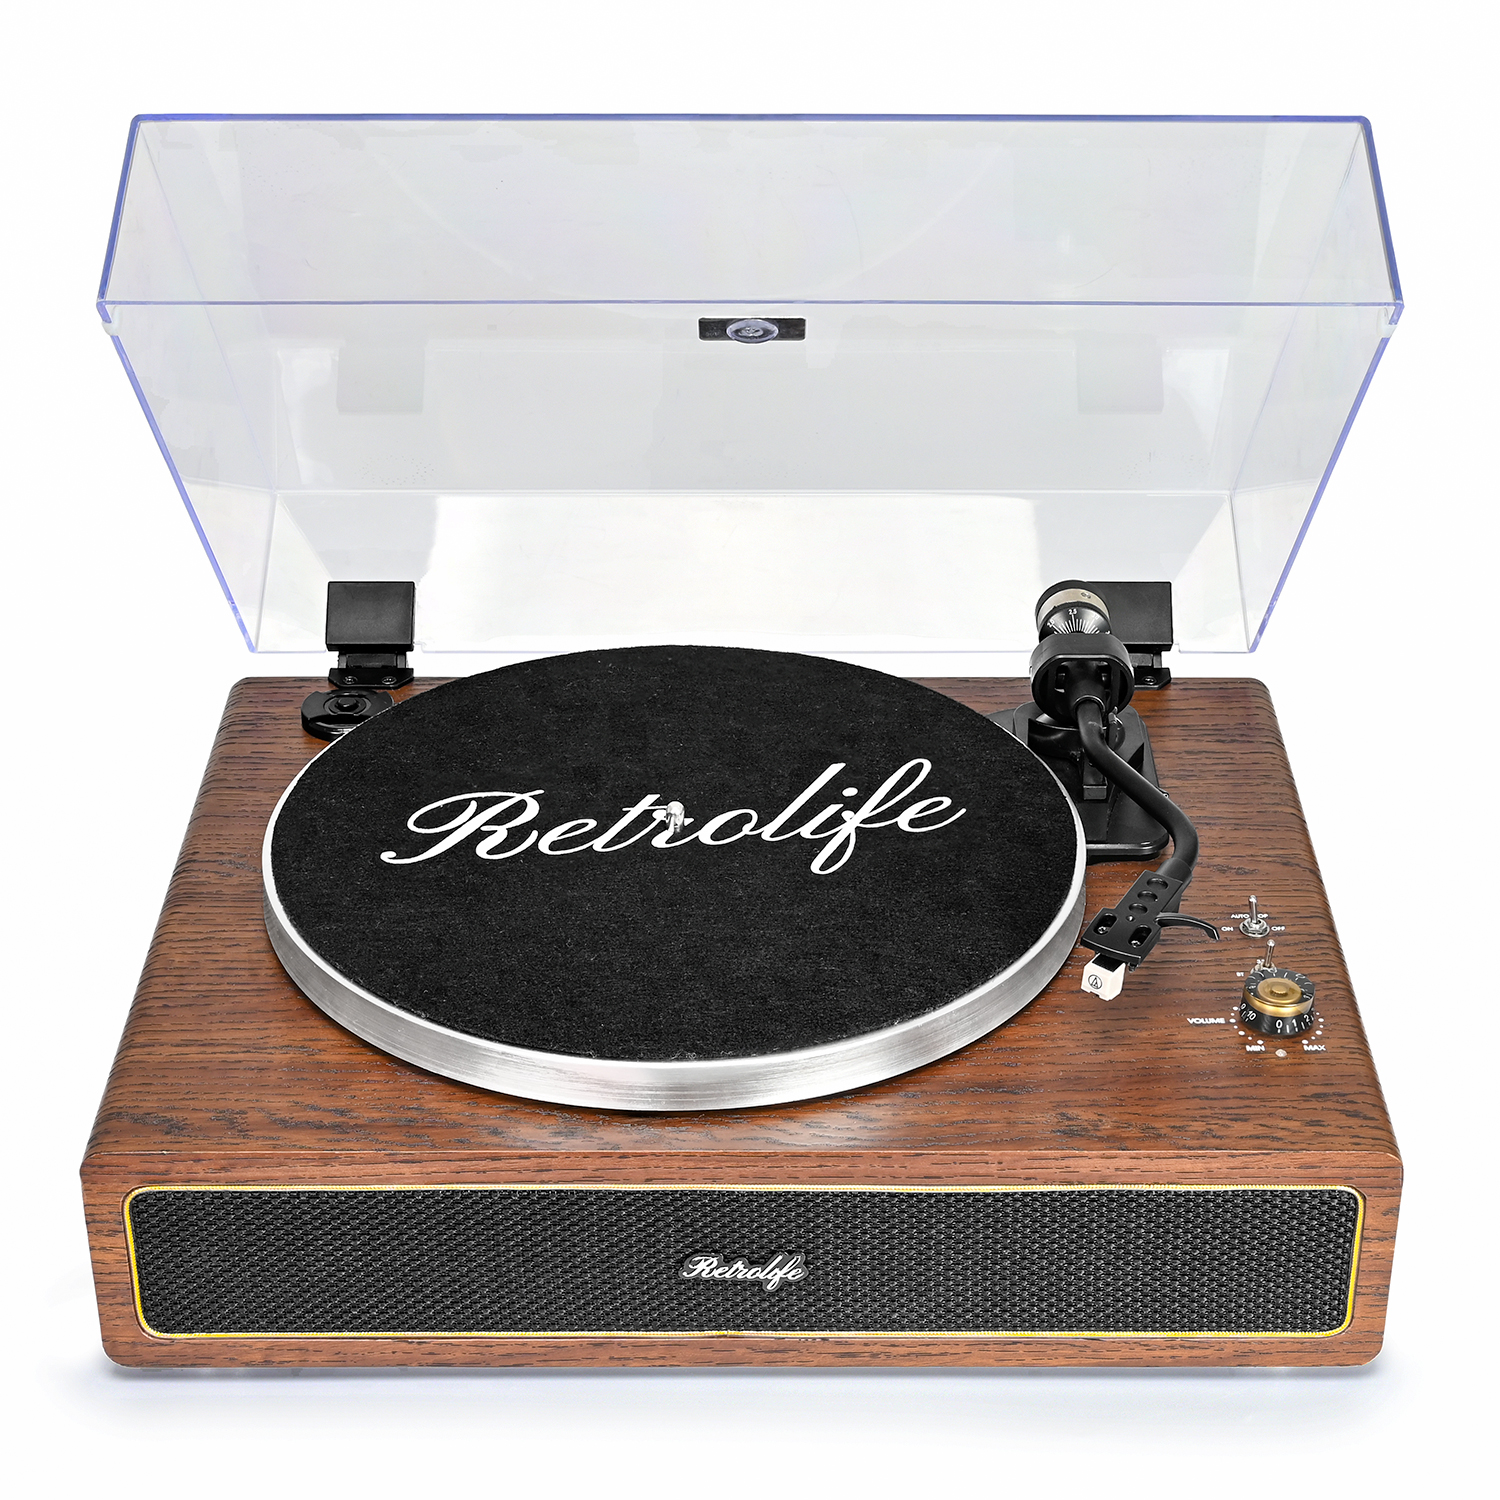 Kedok Record Player Vintage 3-Speed Bluetooth Vinyl Turntable with Stereo  Speaker, Belt Driven Suitcase Vinyl Record Player